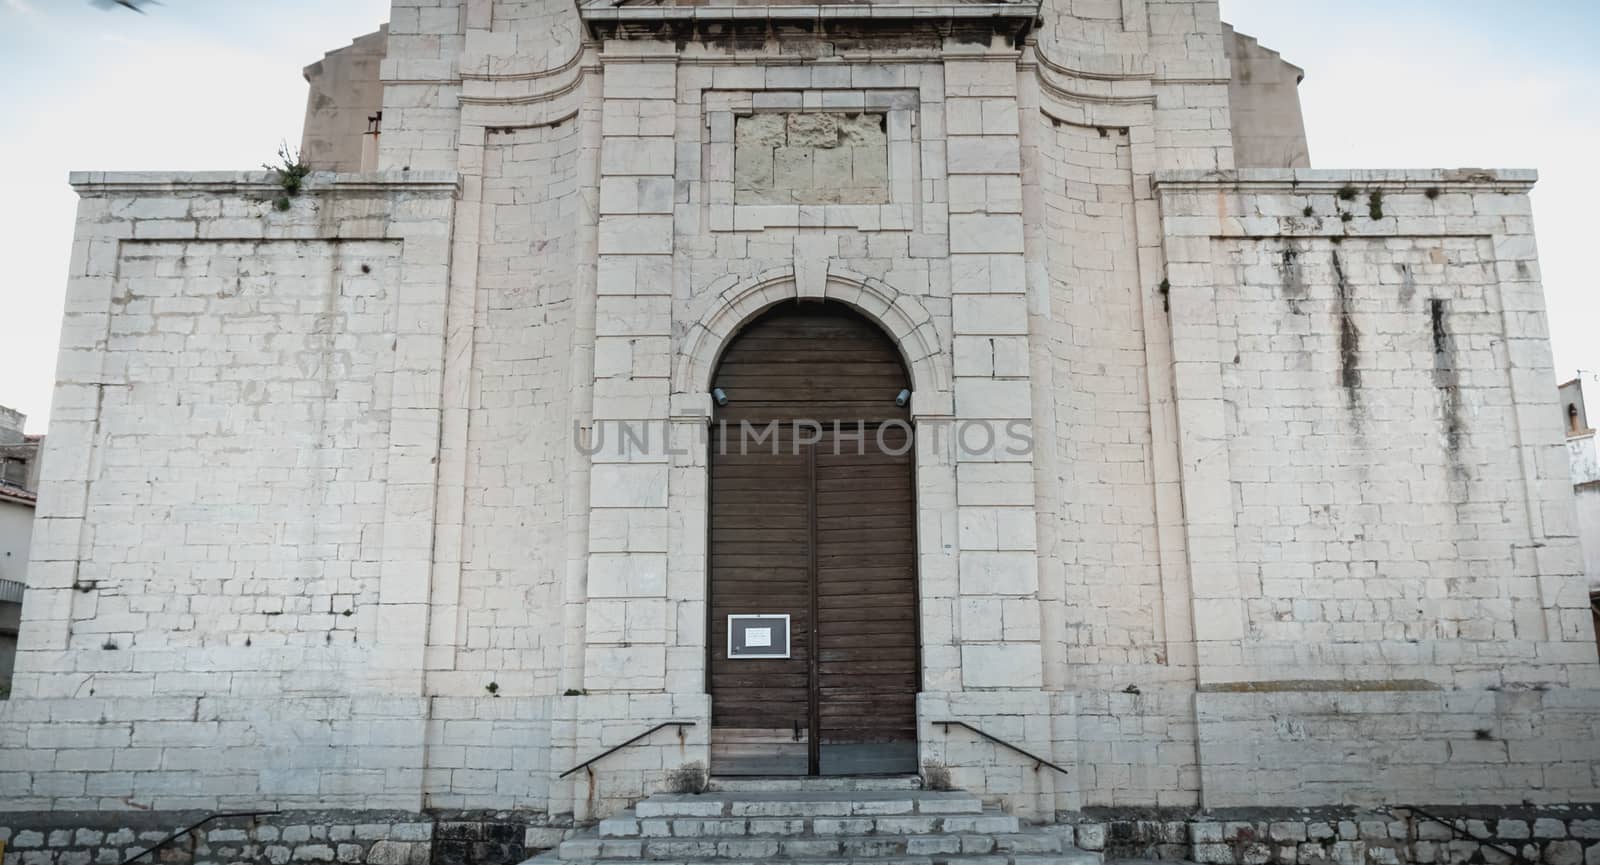 Sete, France - January 4, 2019: Architectural detail of the Saint Louis Church in the upstate of the city on a winter day